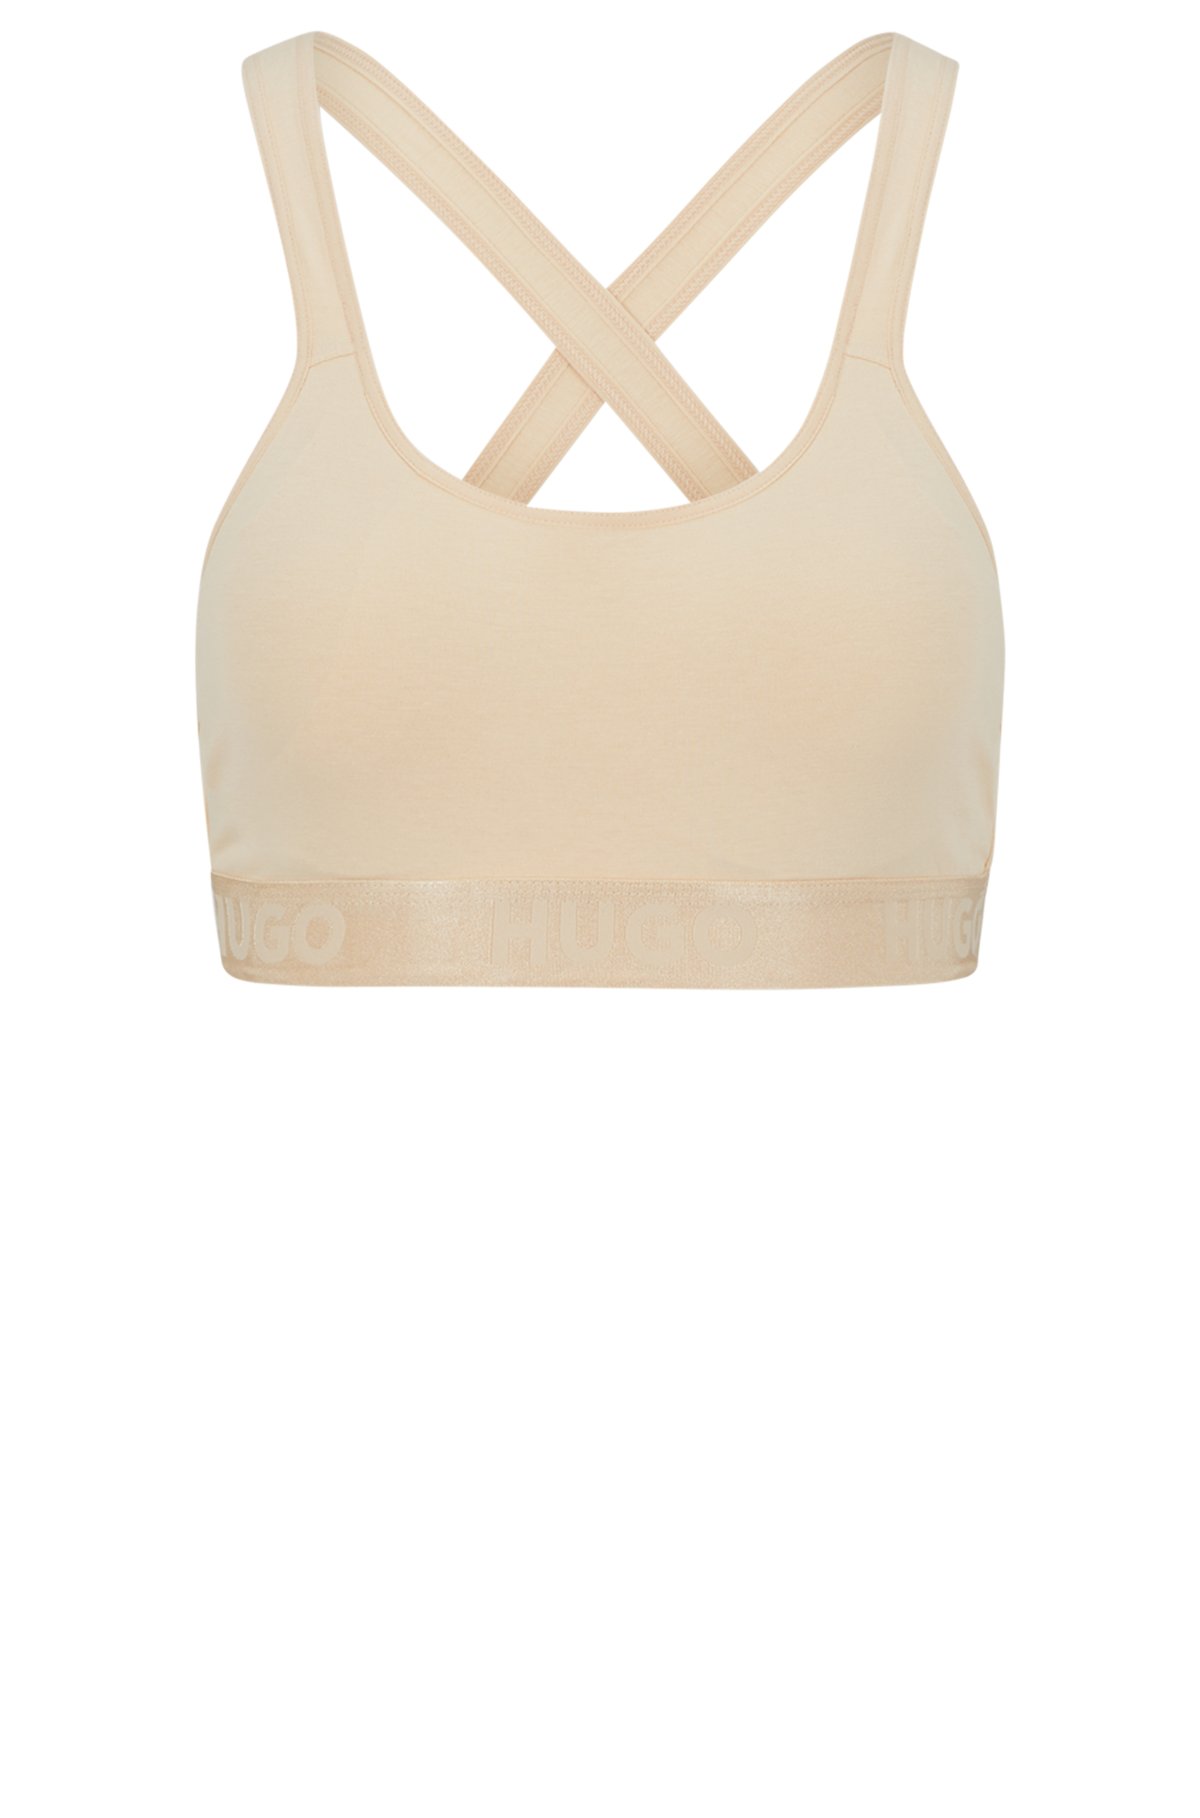 logos repeat Bralette HUGO with cotton in - stretch